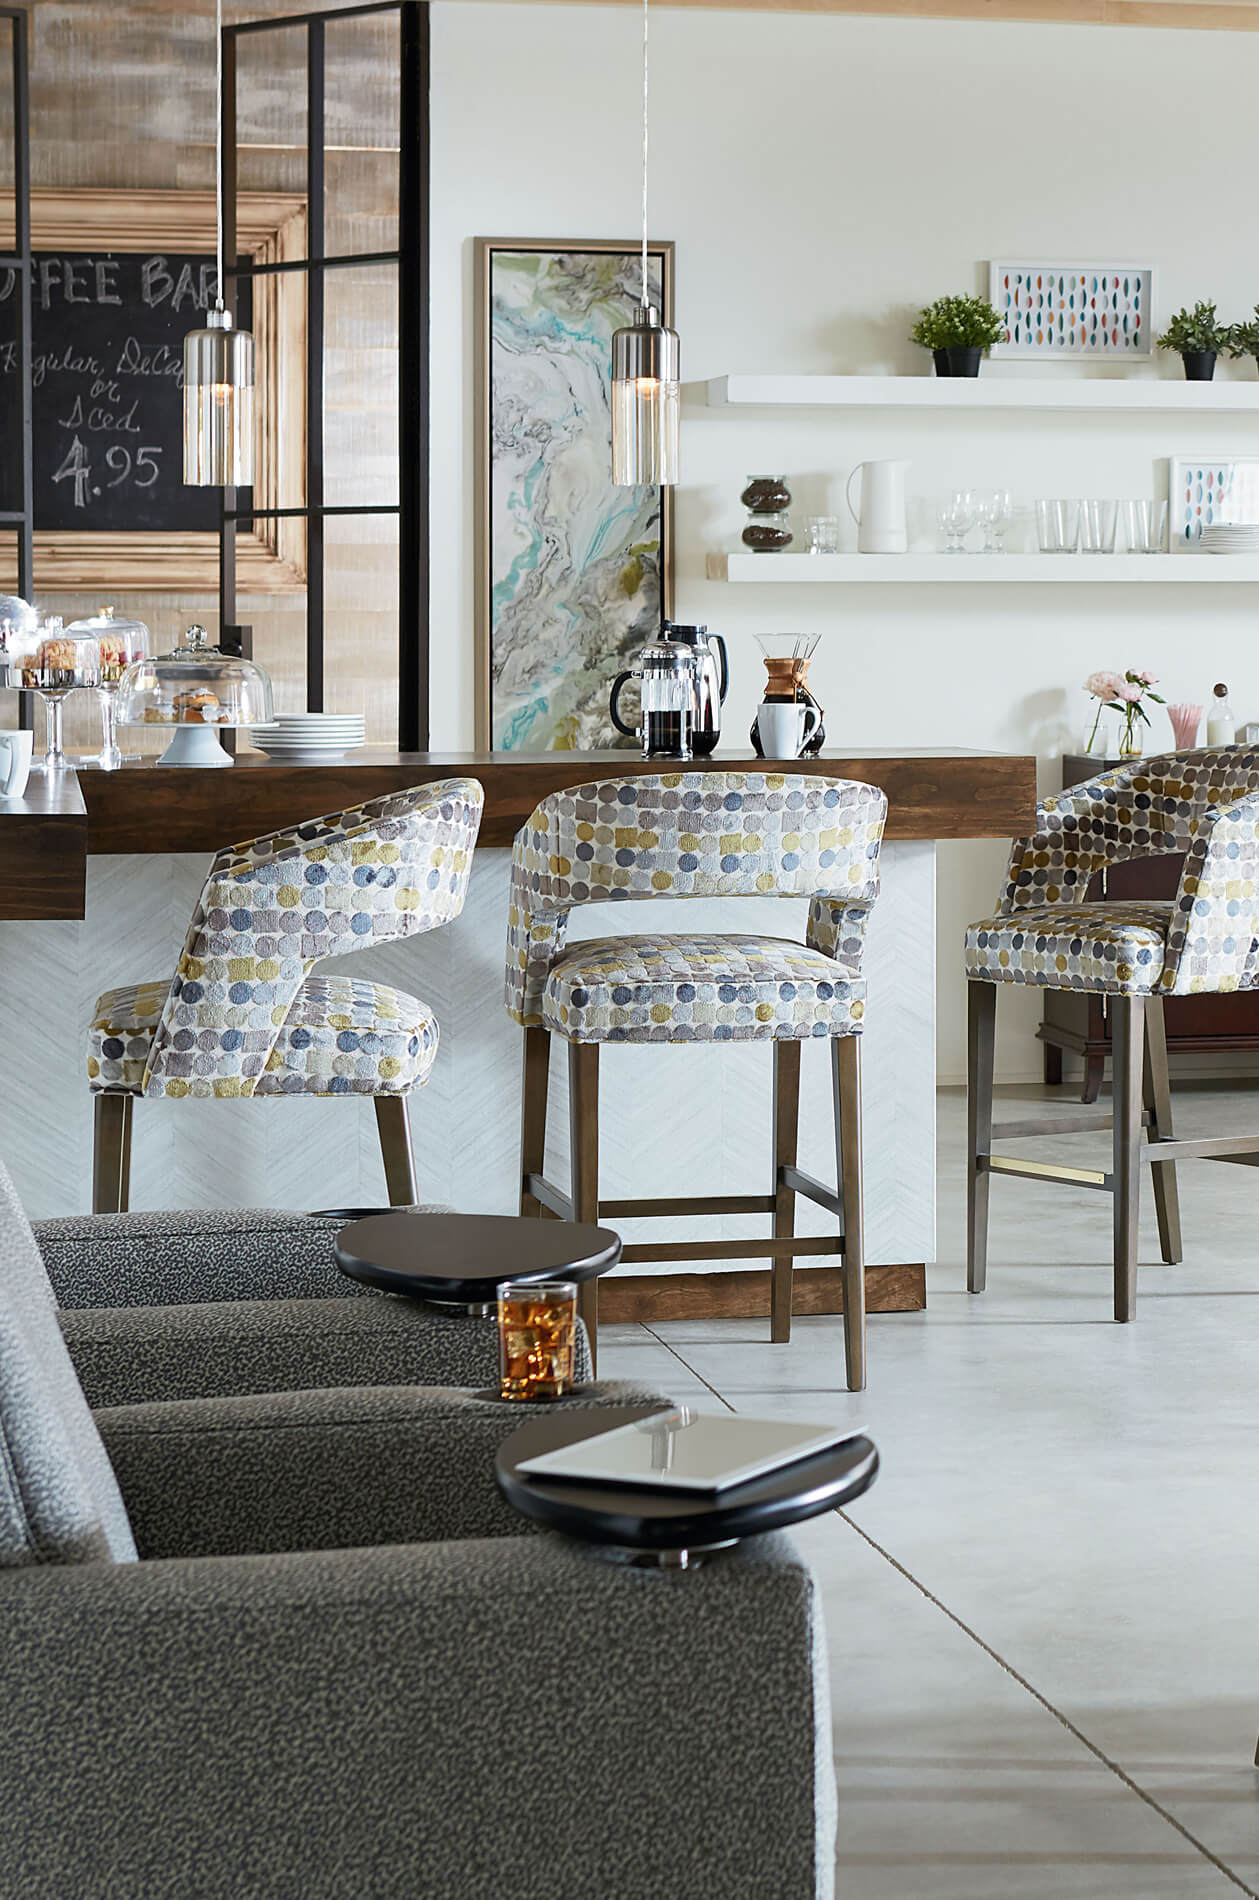 Fairfield's Bryant Wooden Barstools with Colorful Upholstery Pattern